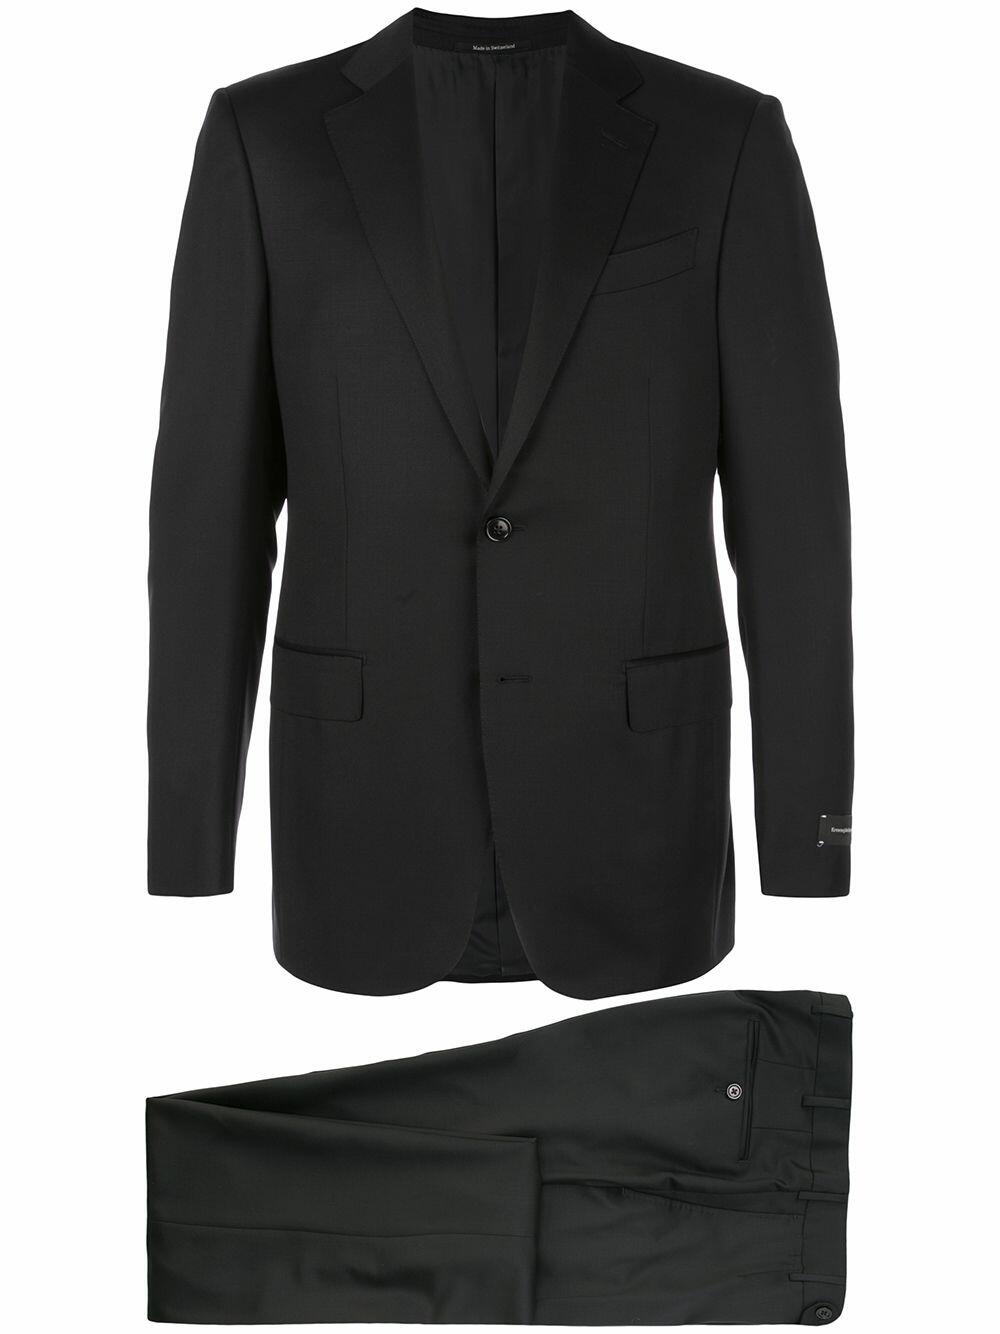 Zegna - Black High Performance Micronsphere Wool Suit